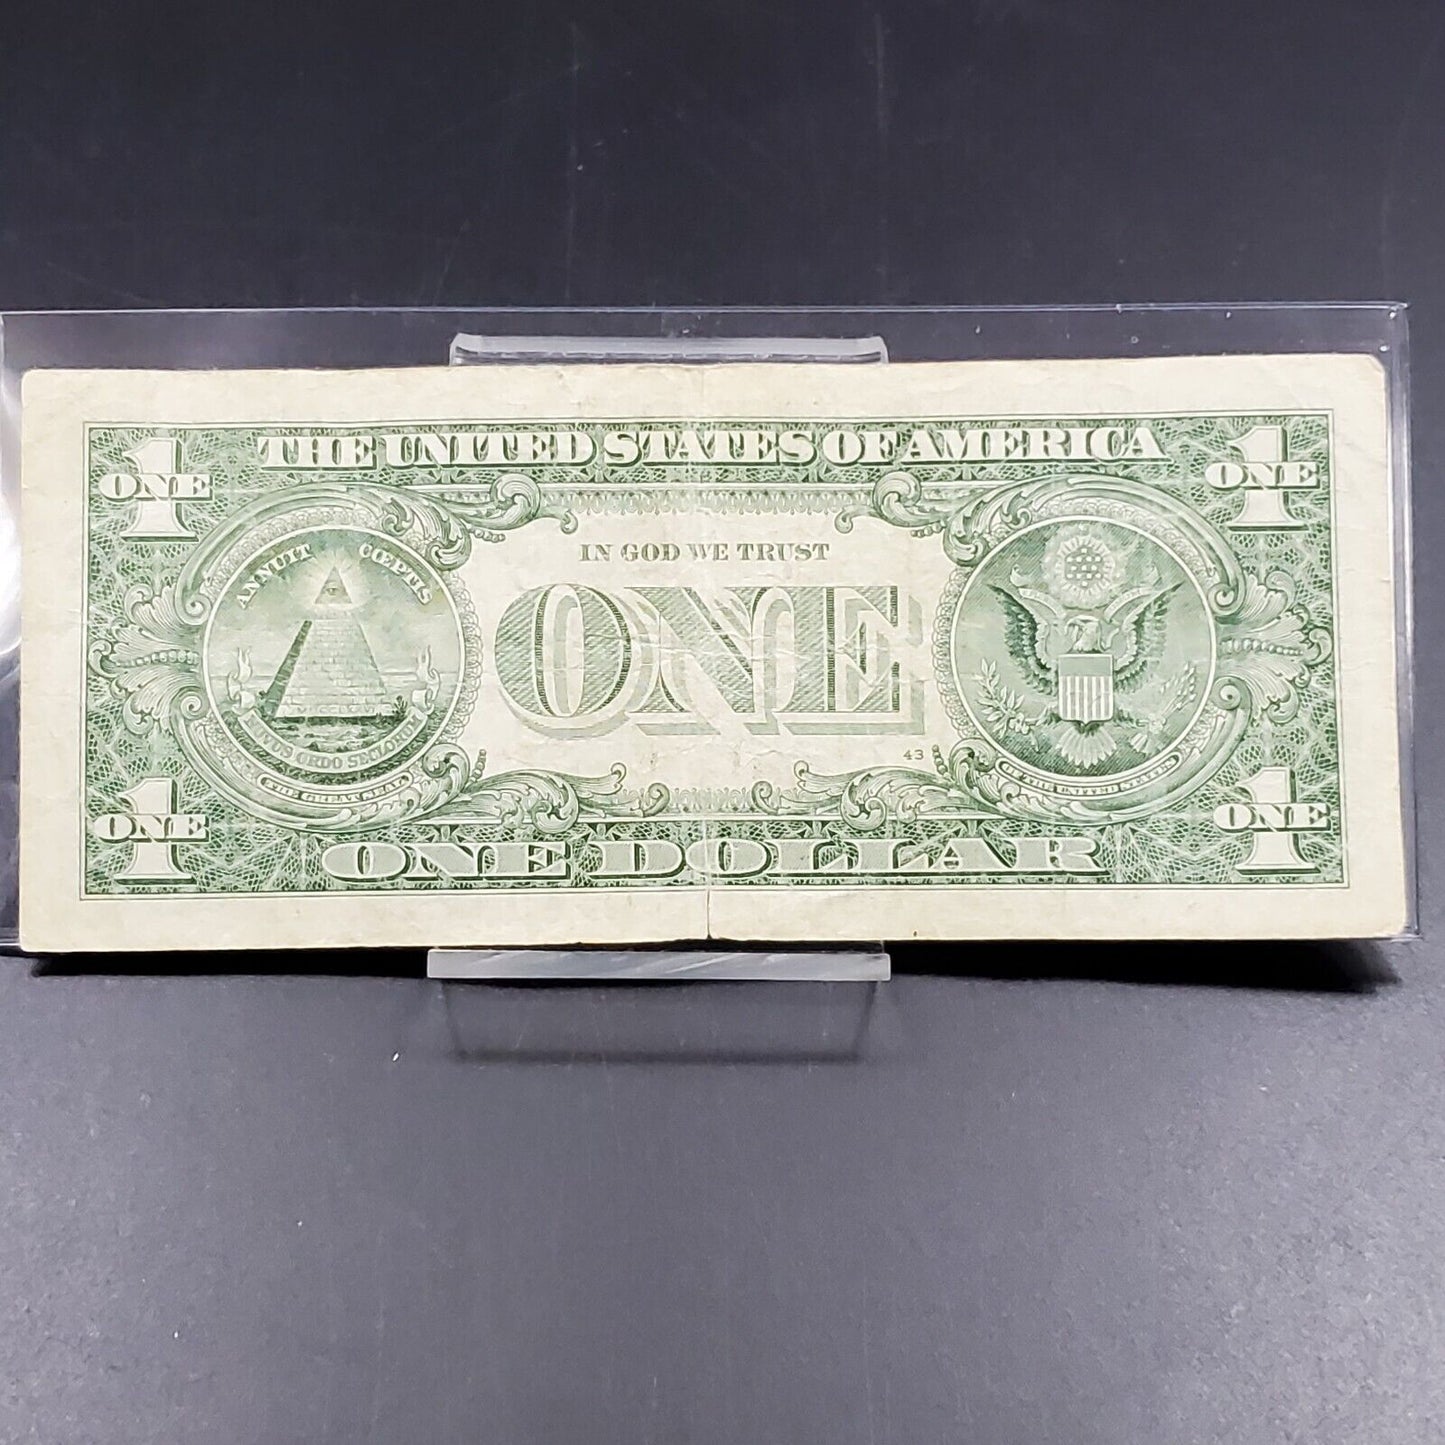 2013 FRN Federal Reserve Note US Currency Bill Quintup Repeat Serial # Circ